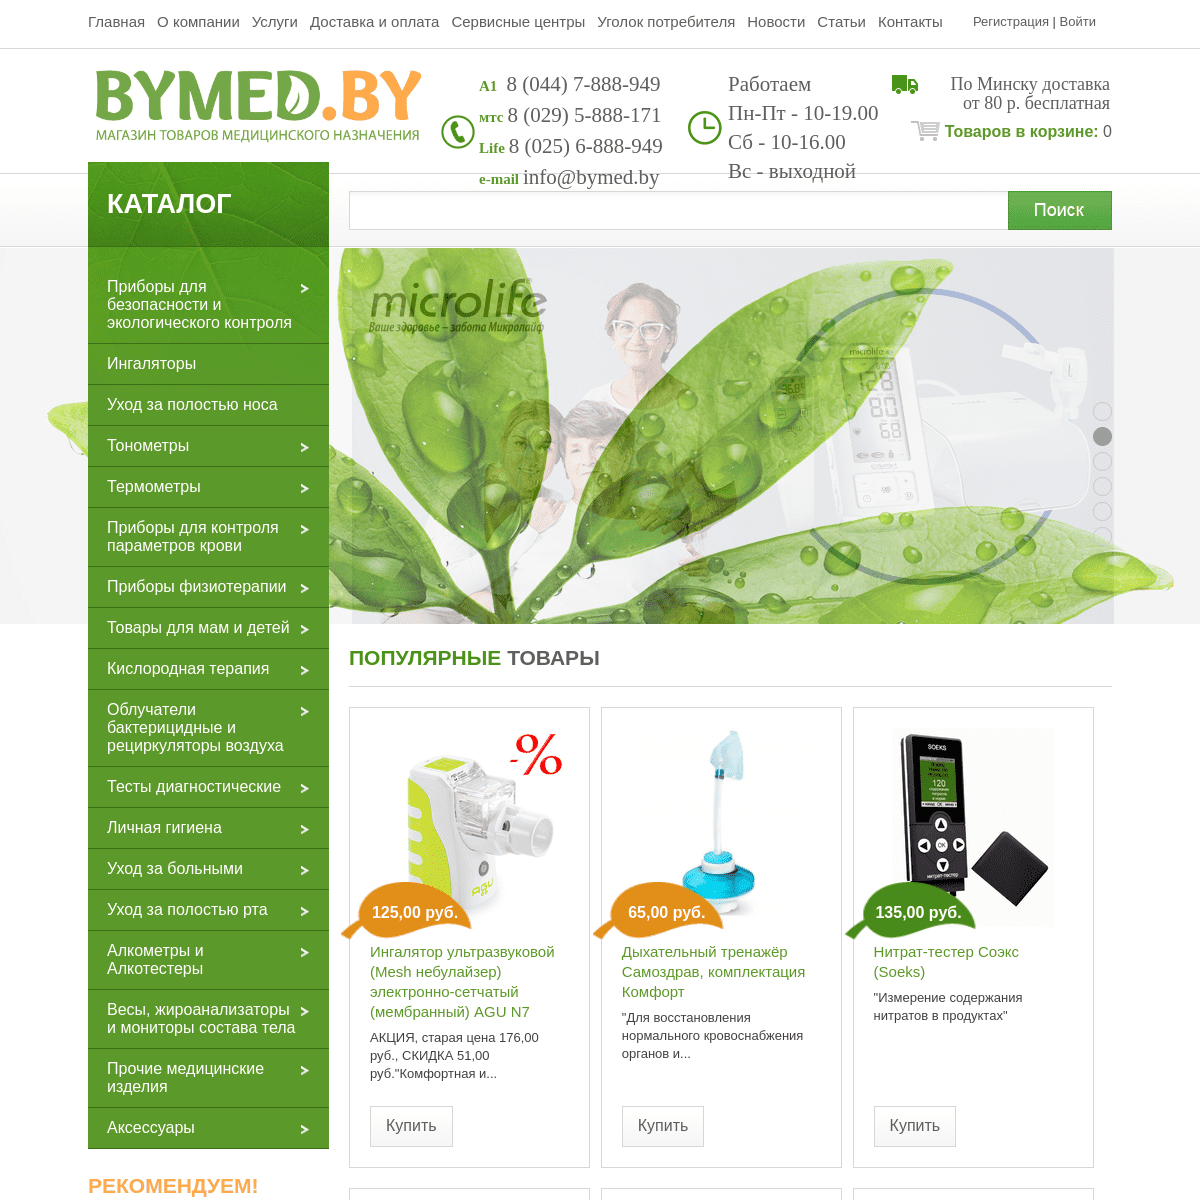 A complete backup of bymed.by